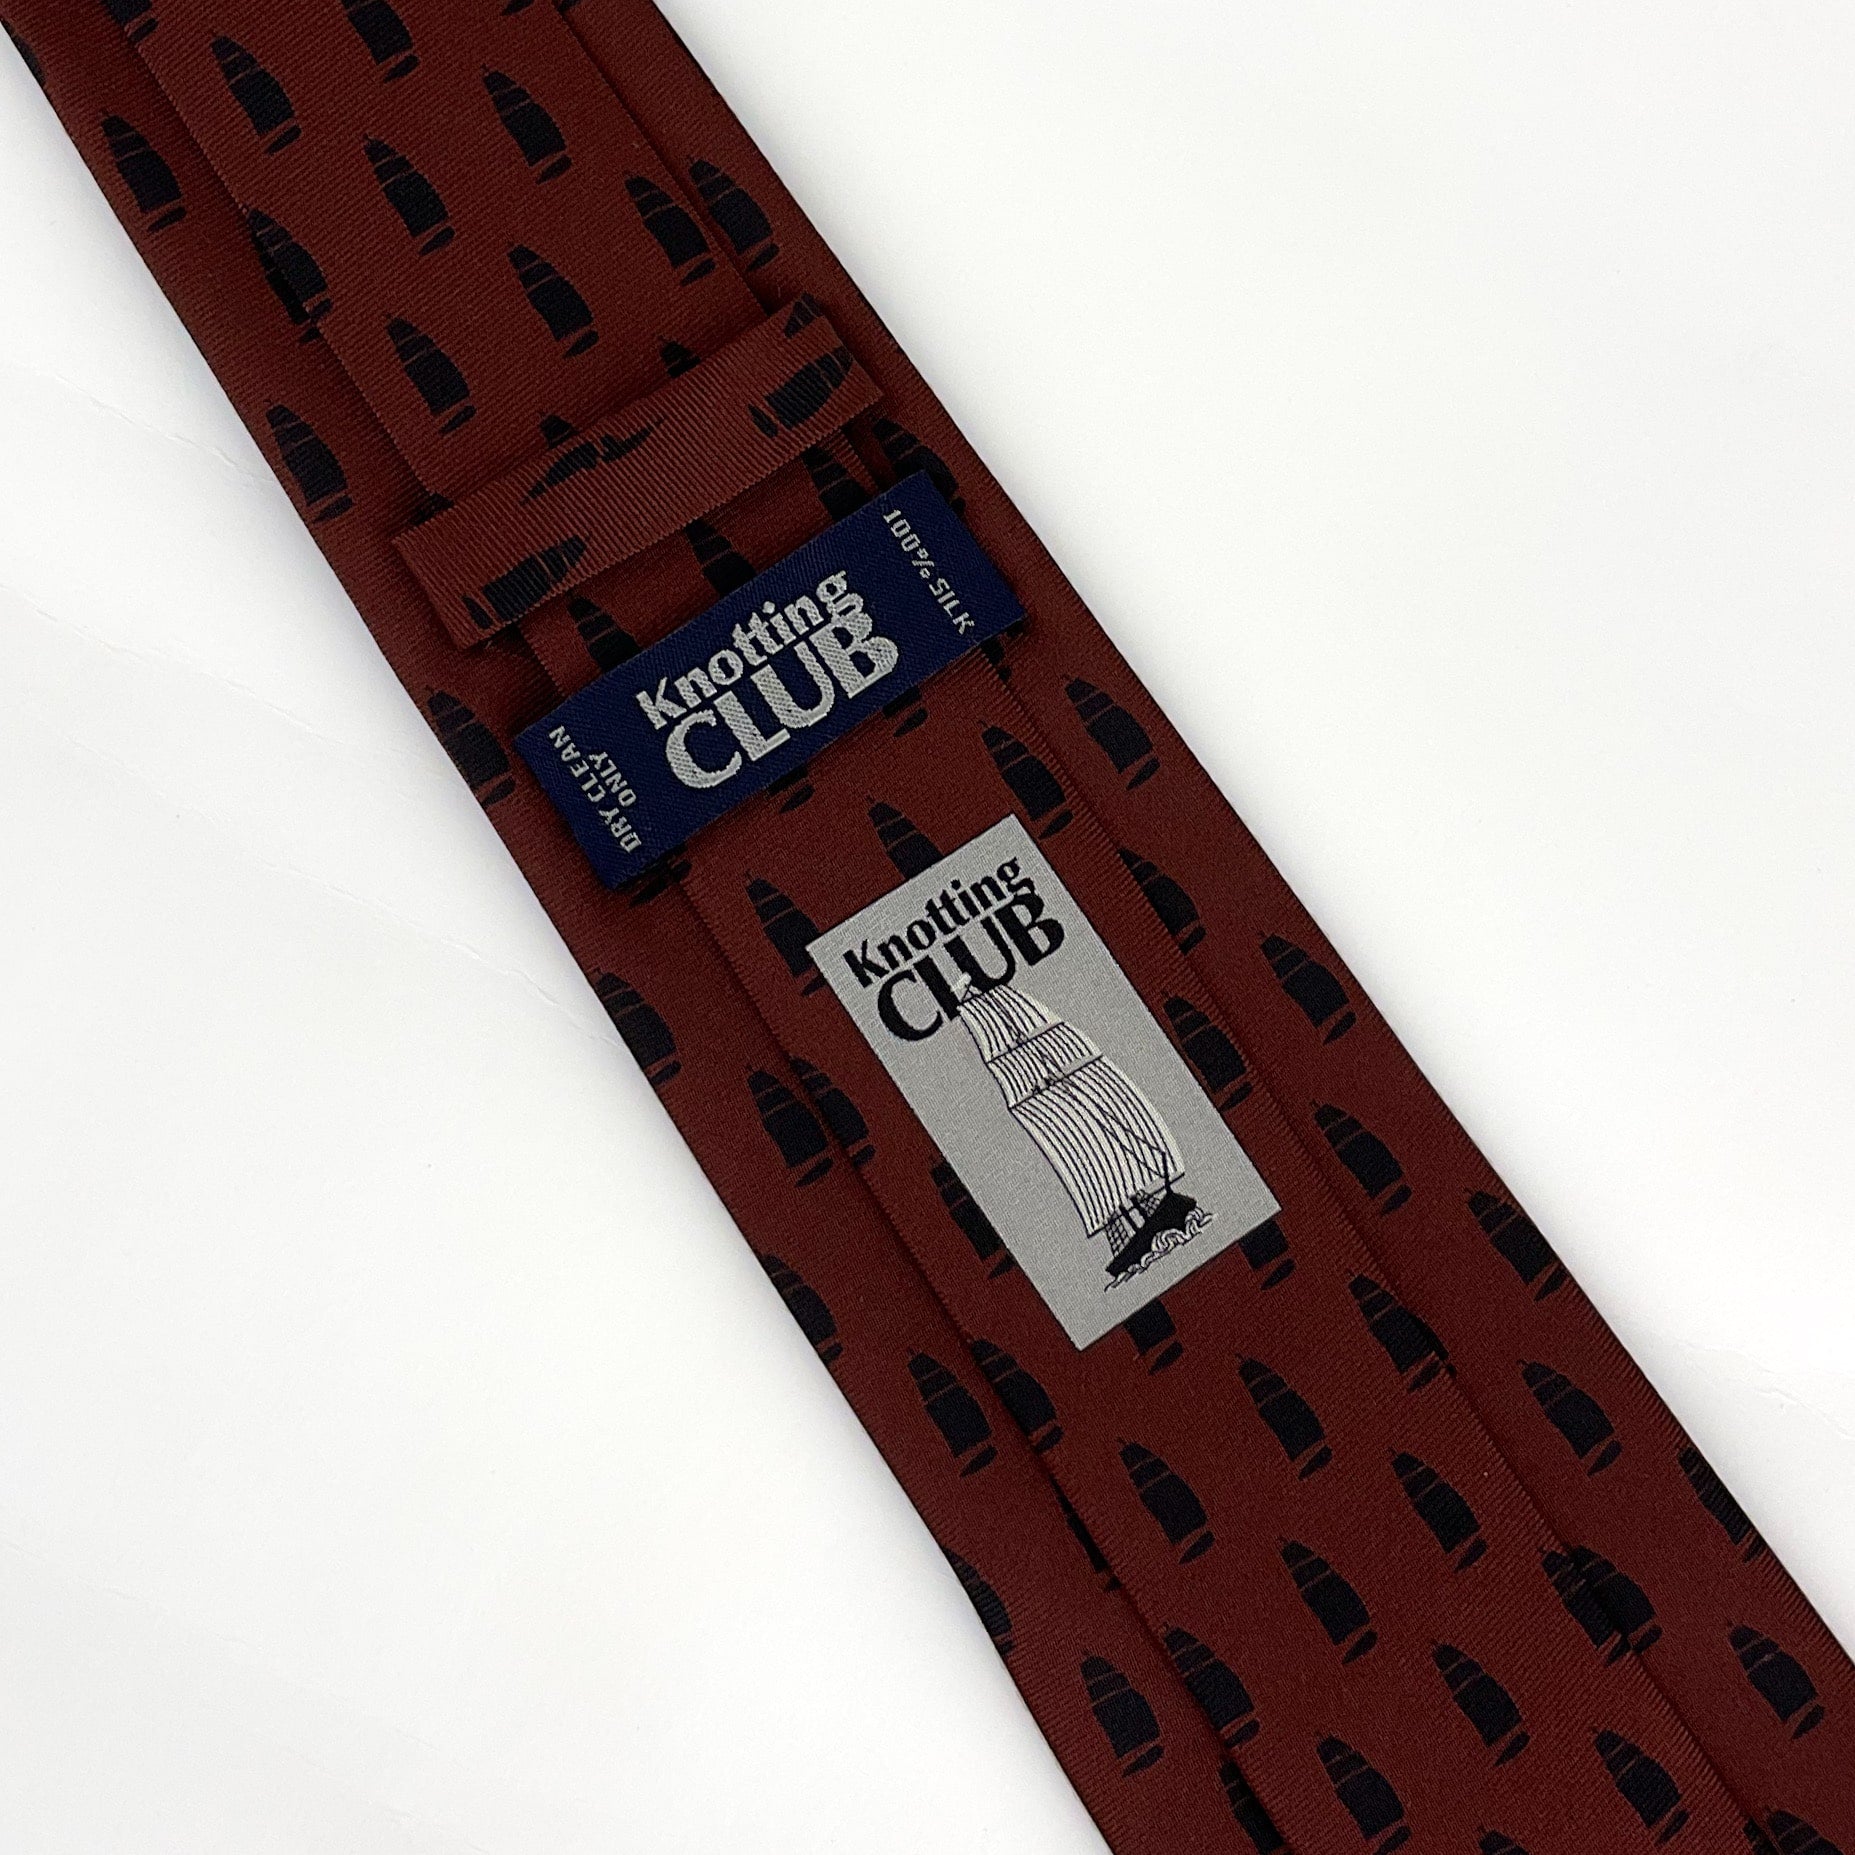 The back side of a burgundy red silk tie with a printed pattern of ships. The printed logo and and label of the tie is visible 